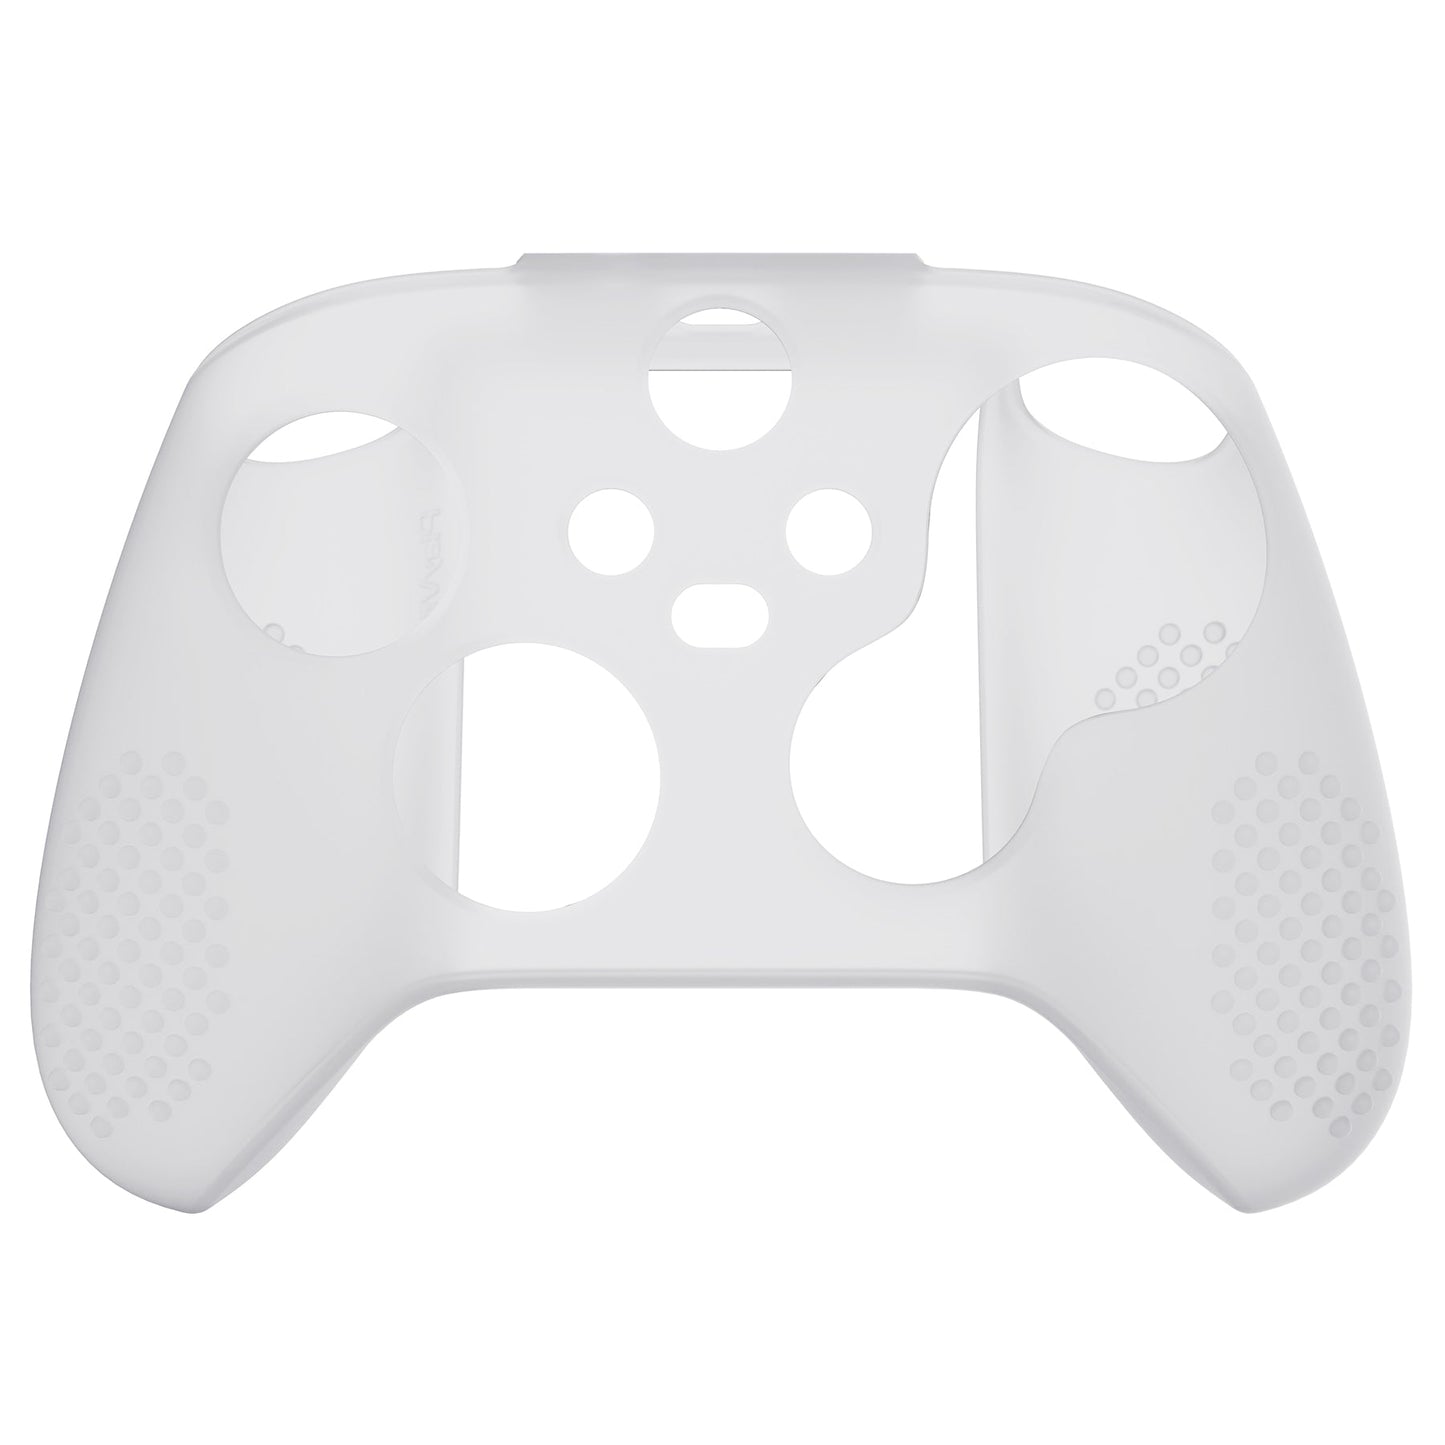 PlayVital Clear White 3D Studded Edition Anti-slip Silicone Cover Skin for Xbox Series X/S Controller, Rubber Case Protector for Xbox Series X/S Controller with 6 Clear White Thumb Grip Caps - SDX3012 PlayVital